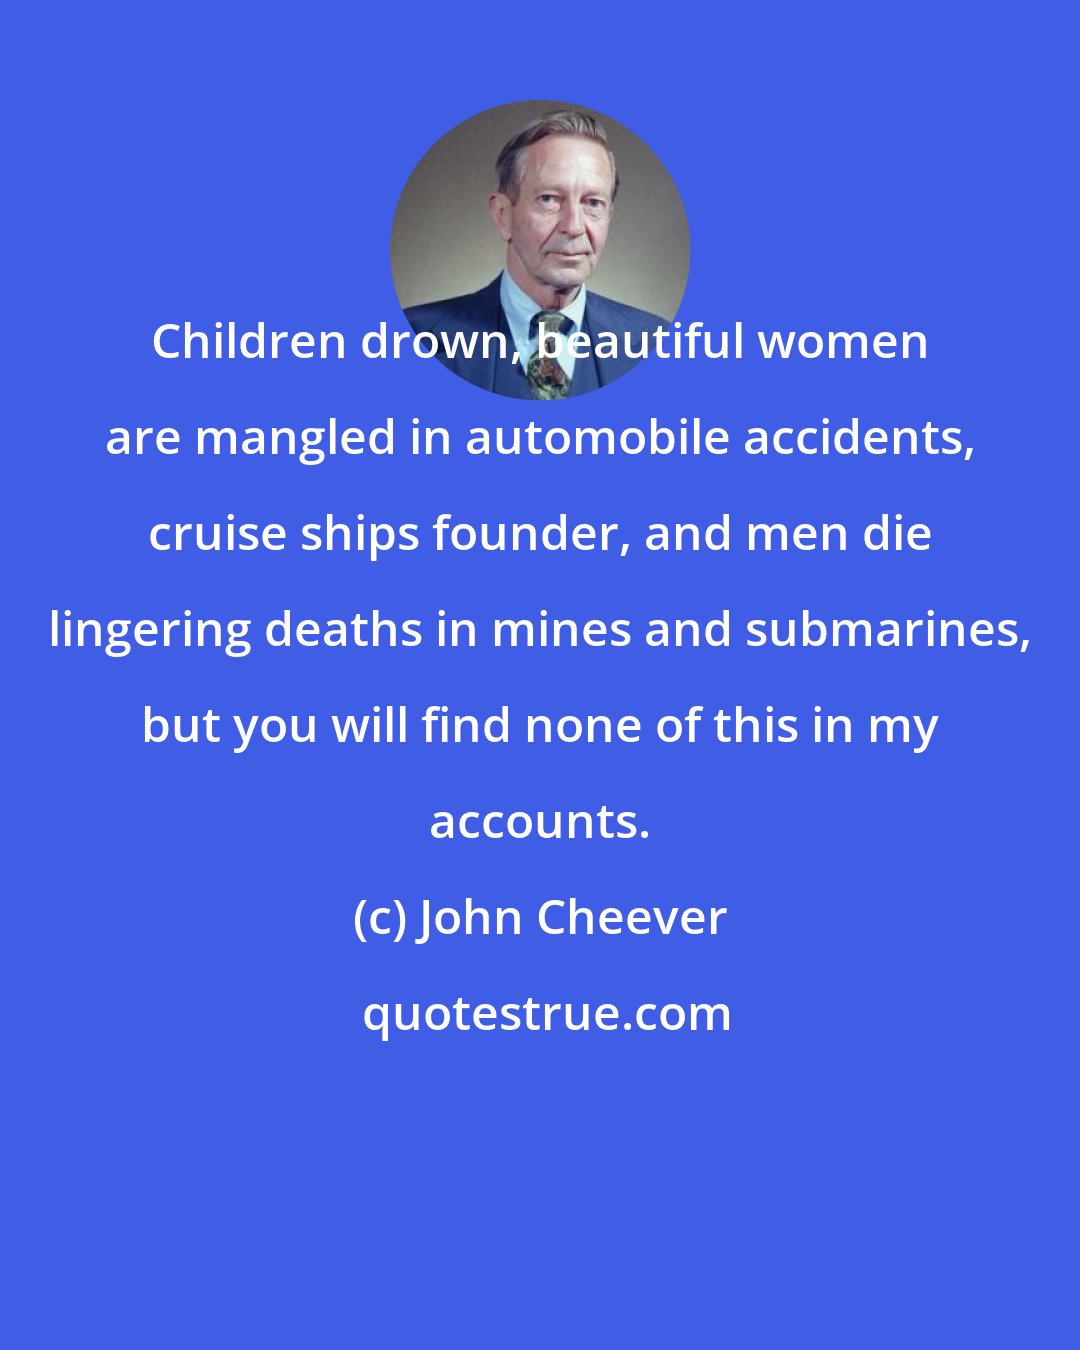 John Cheever: Children drown, beautiful women are mangled in automobile accidents, cruise ships founder, and men die lingering deaths in mines and submarines, but you will find none of this in my accounts.